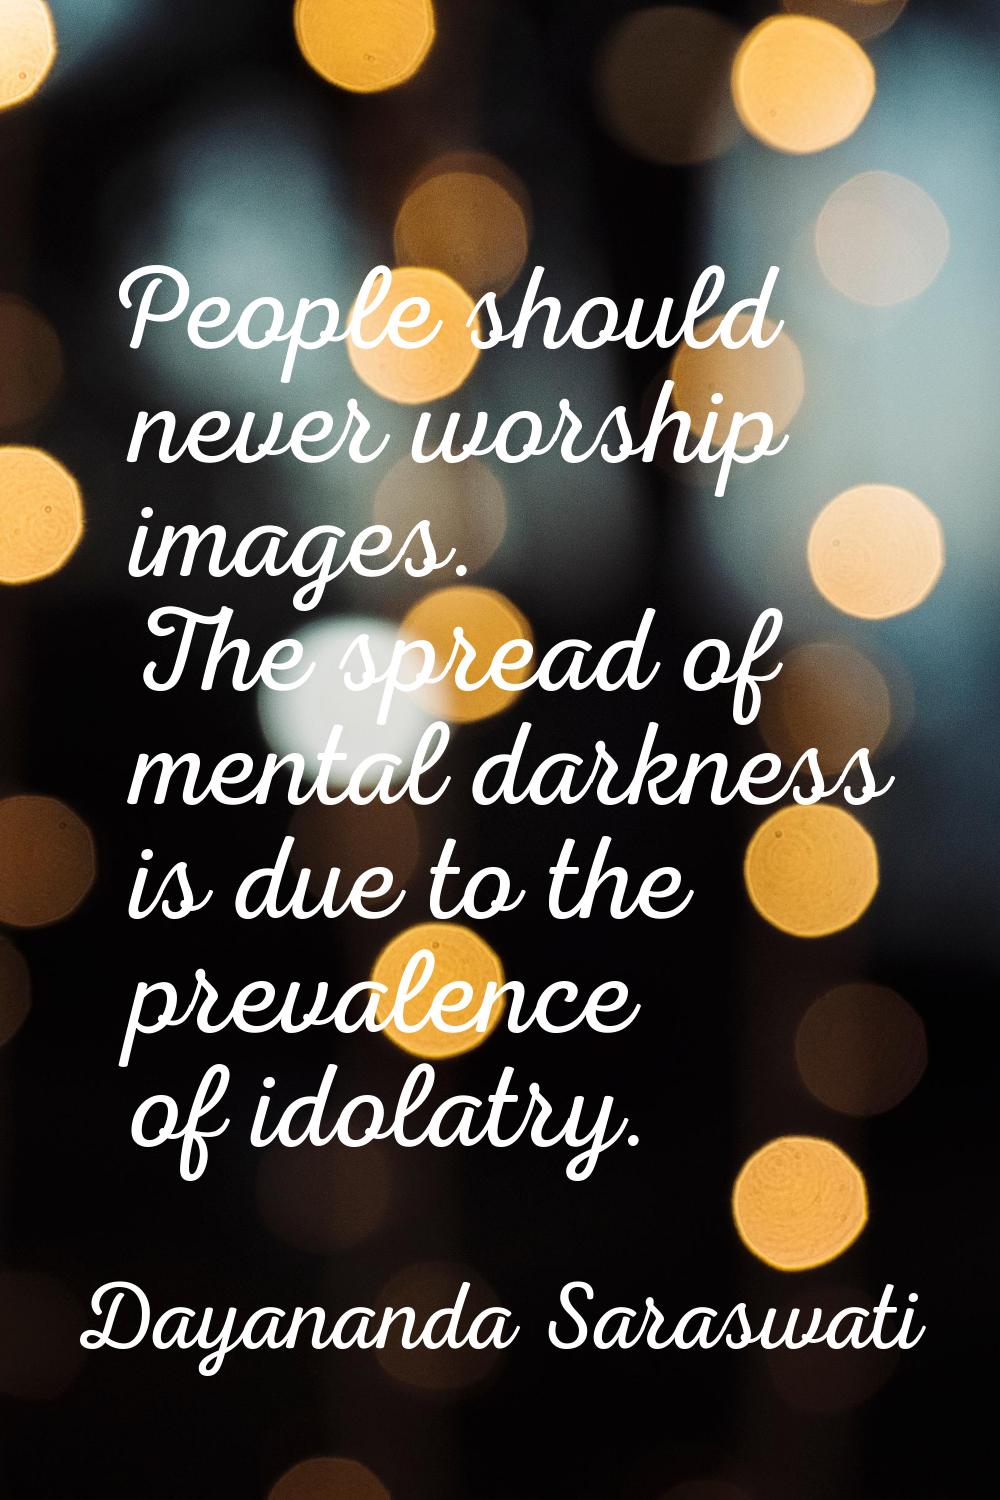 People should never worship images. The spread of mental darkness is due to the prevalence of idola